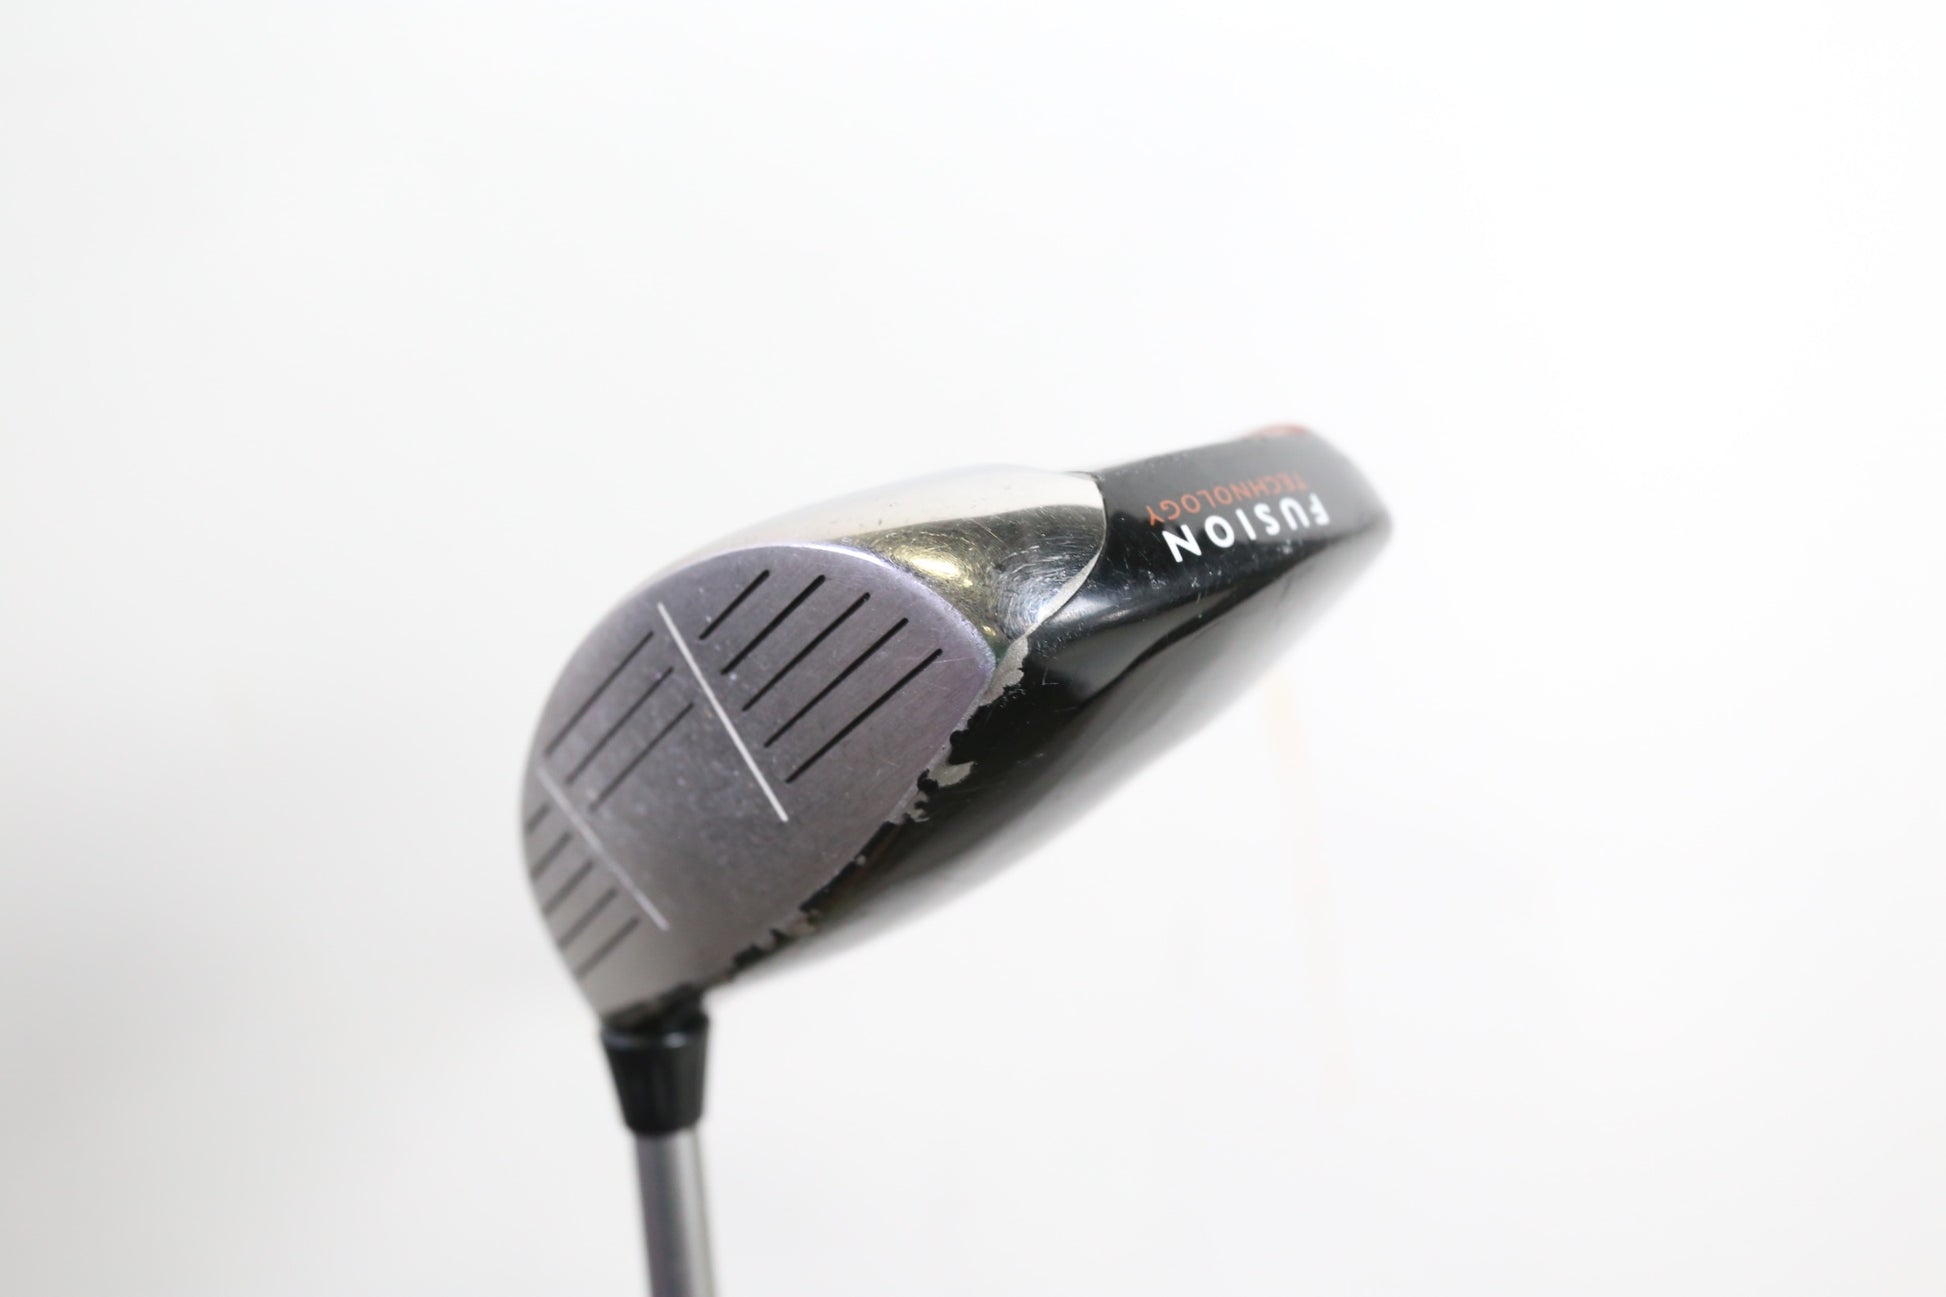 Used Callaway FT-i Squareway 3-Wood - Right-Handed - 15 Degrees - Ladies Flex-Next Round